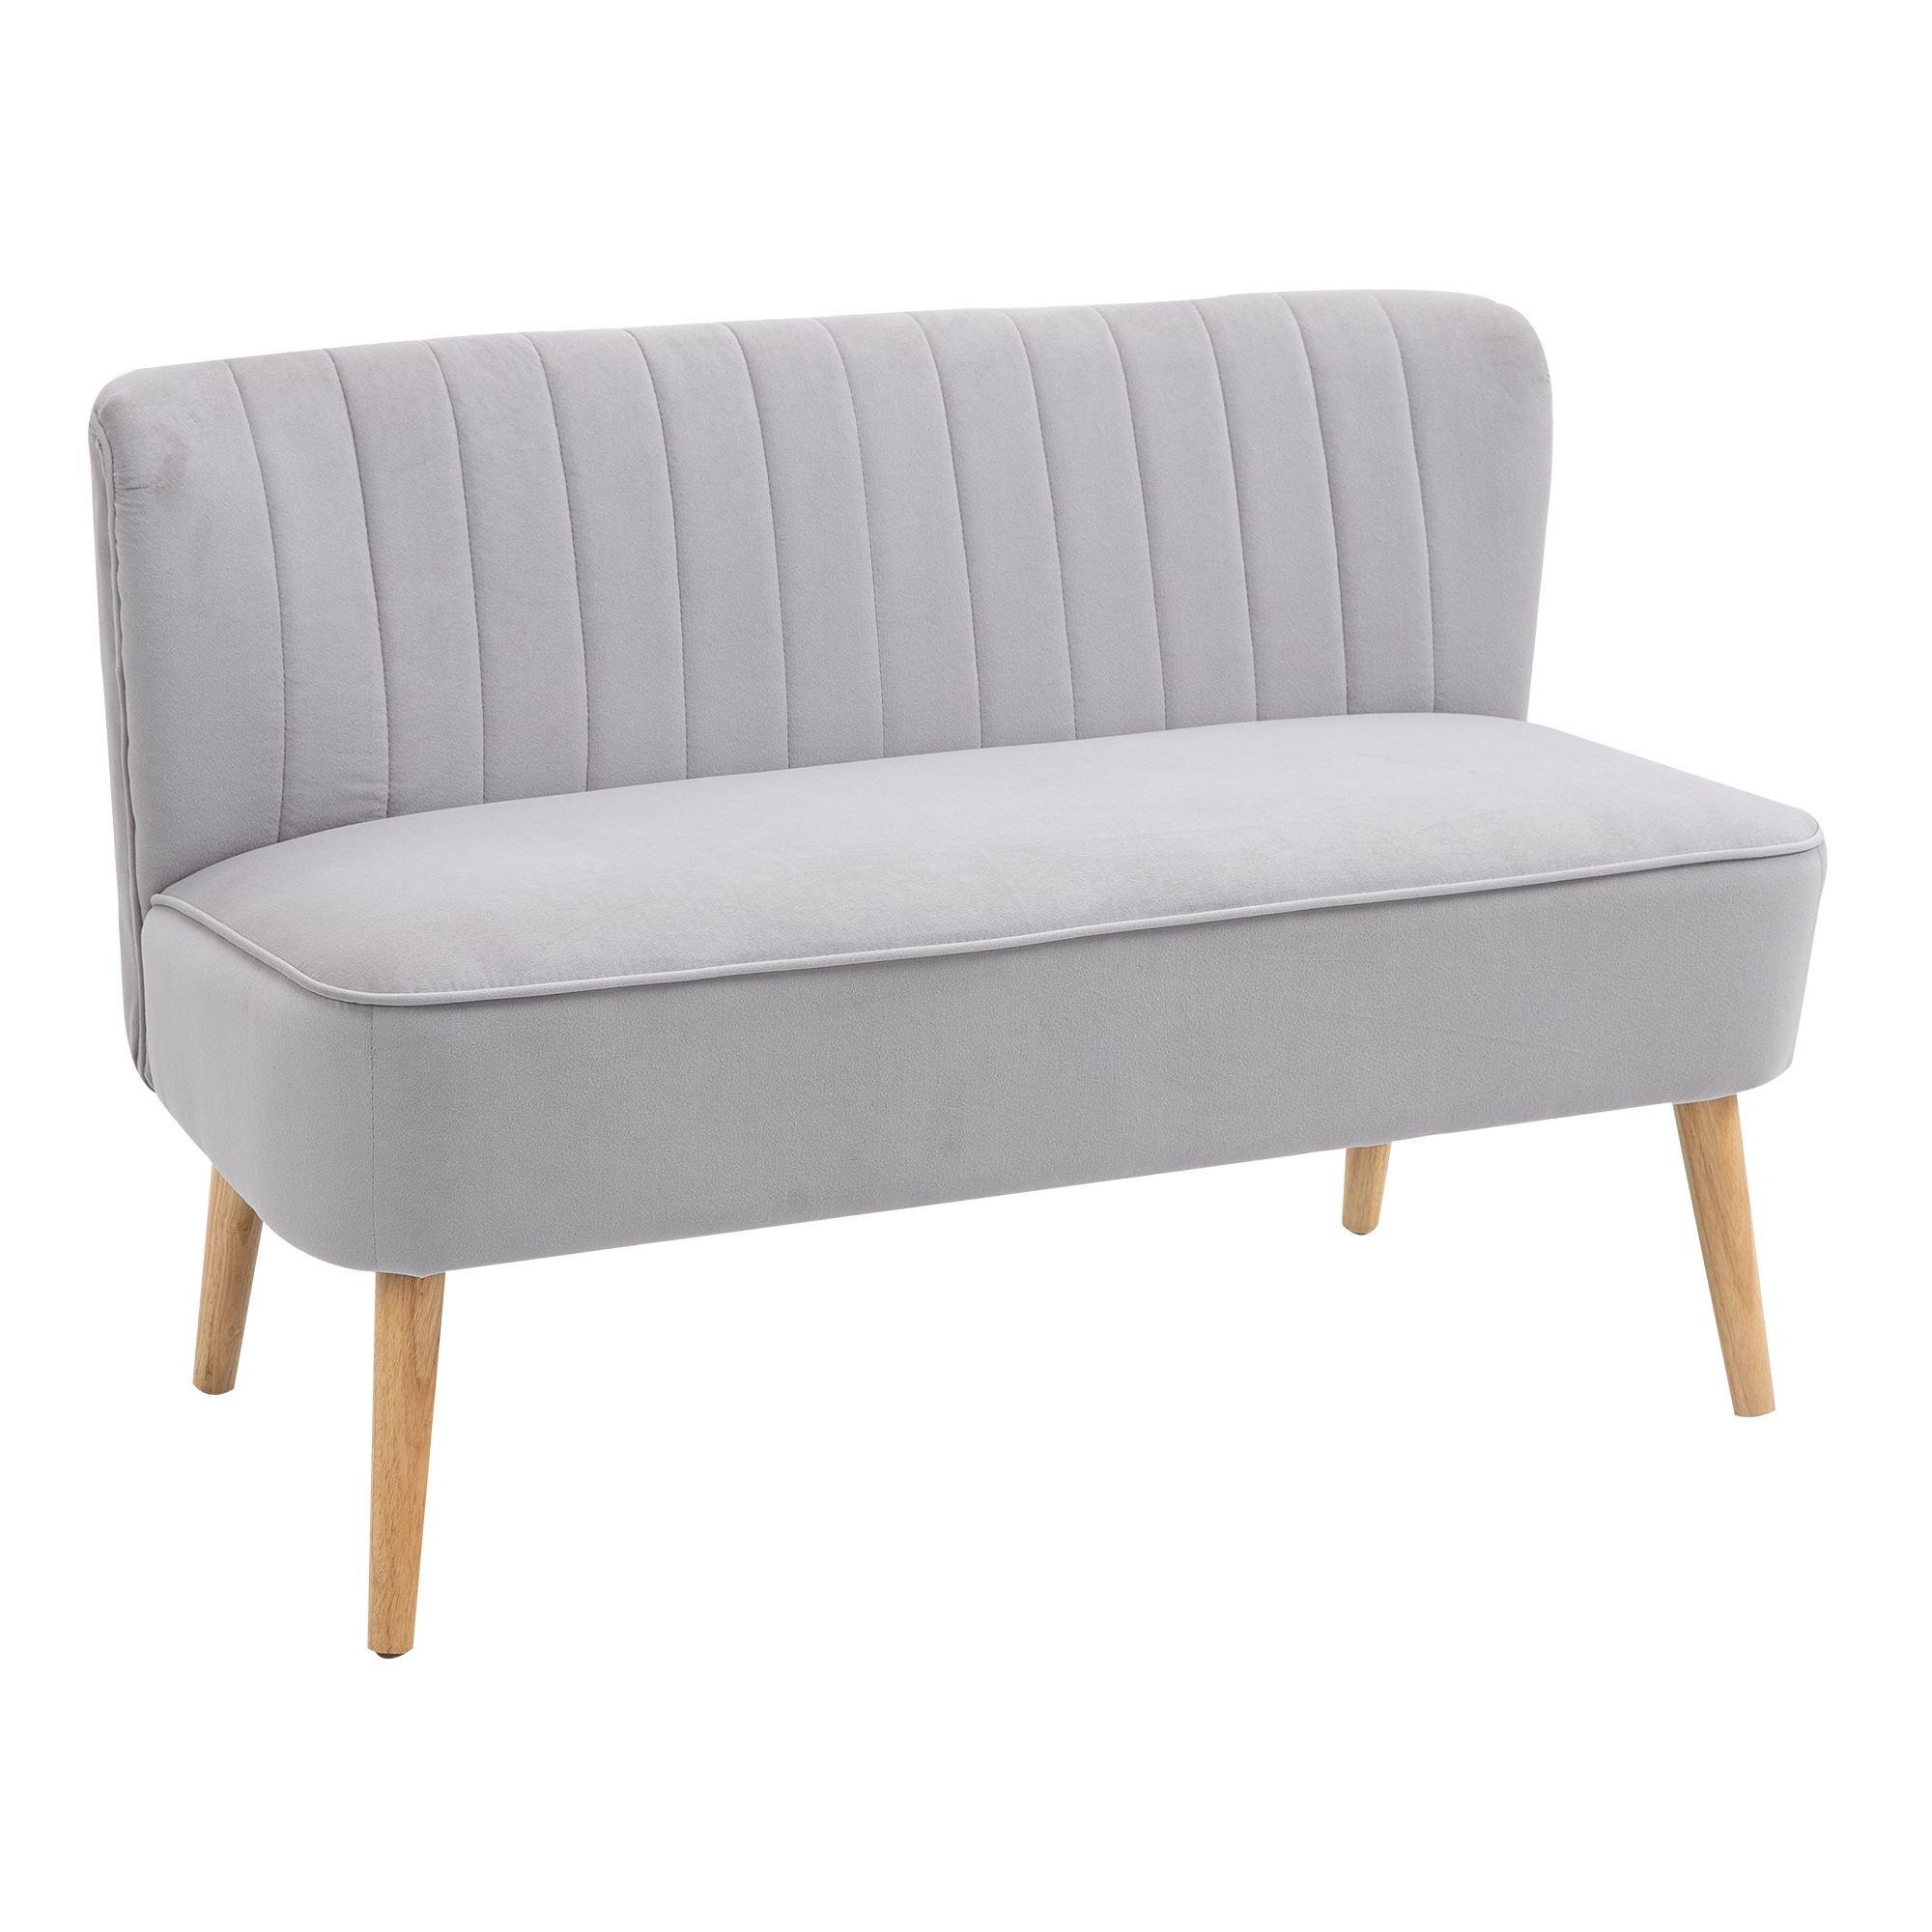 Modern Double Seat Sofa Compact Loveseat Couch Padded Wood Legs